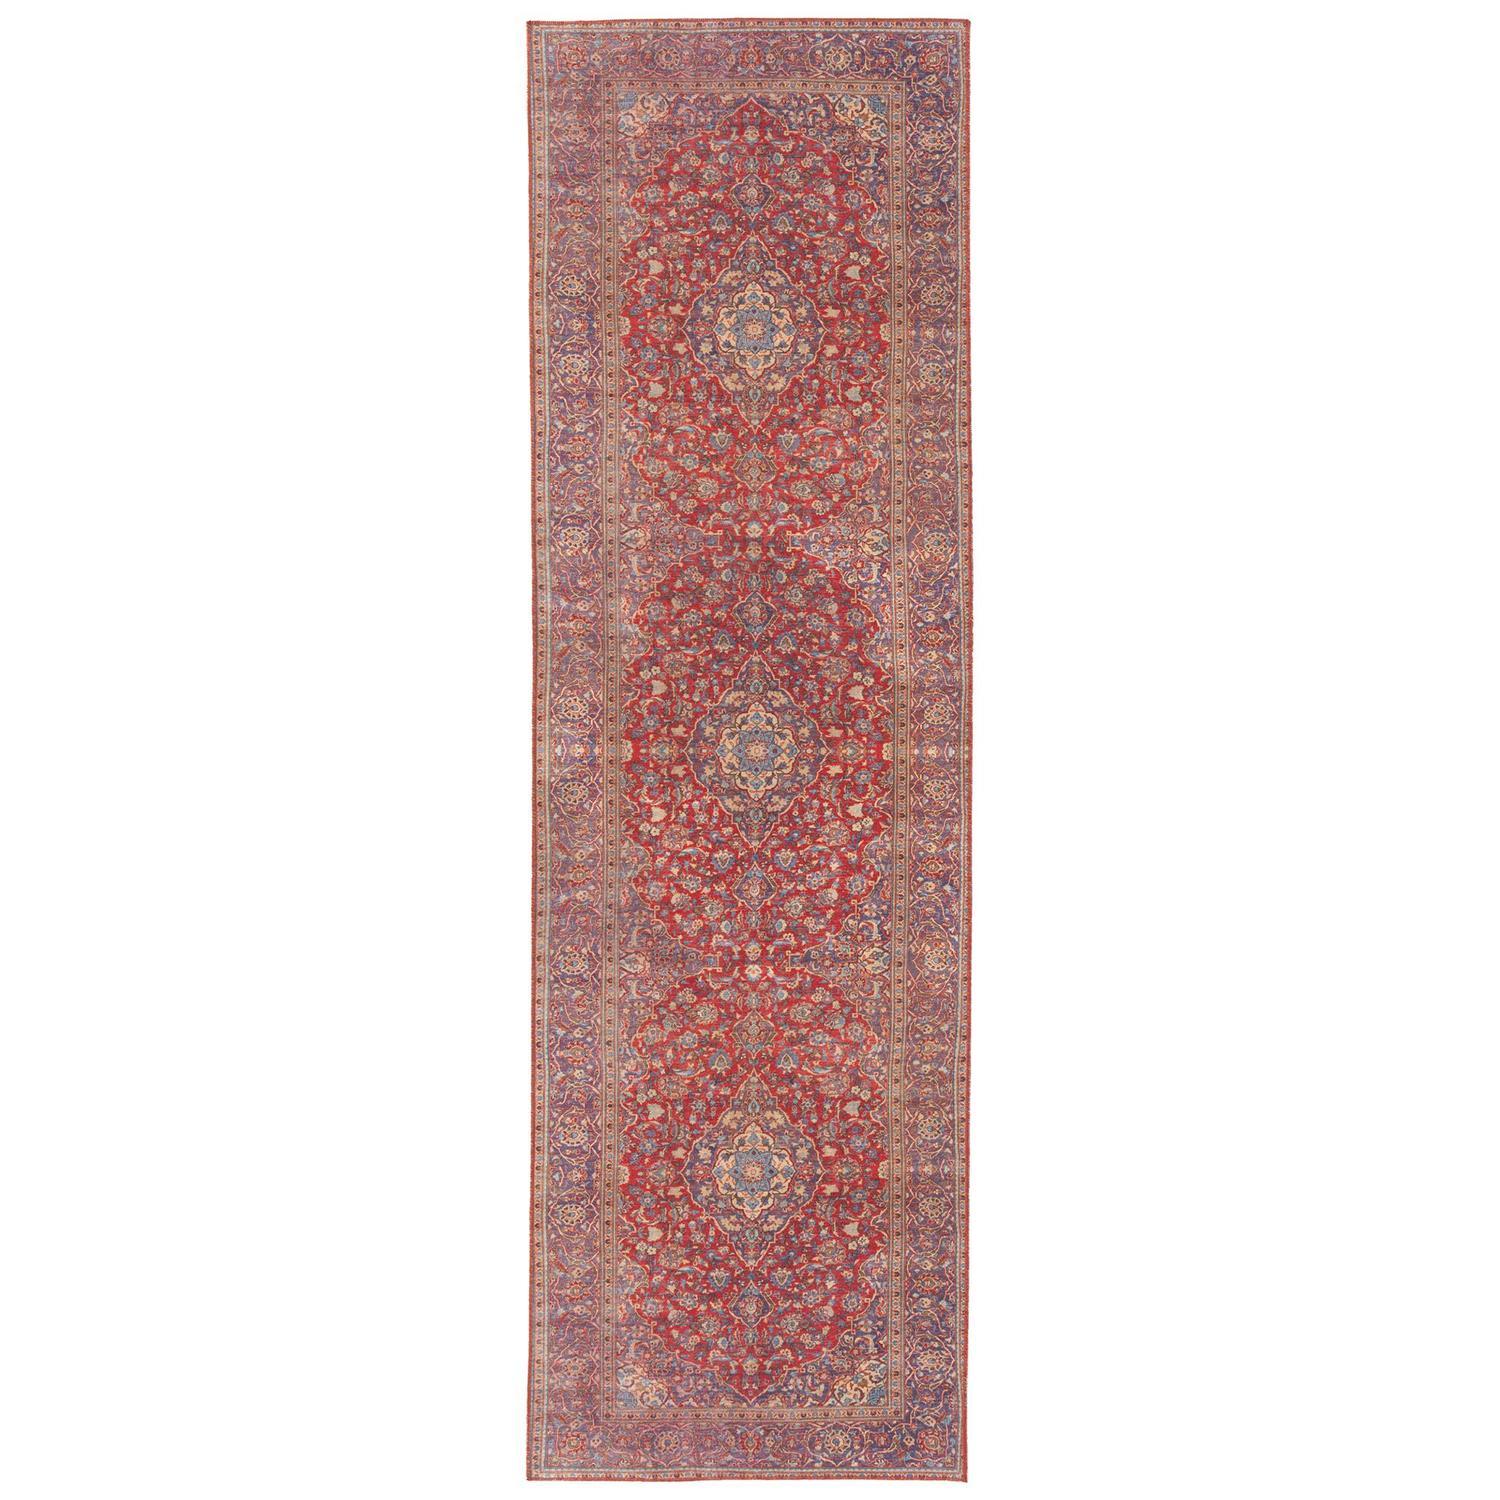 Kaleen Boho Patio BOH03-99 Rug in Coral - (2 Foot 3 Inch x 7 Foot 6 Inch) - image 5 of 5